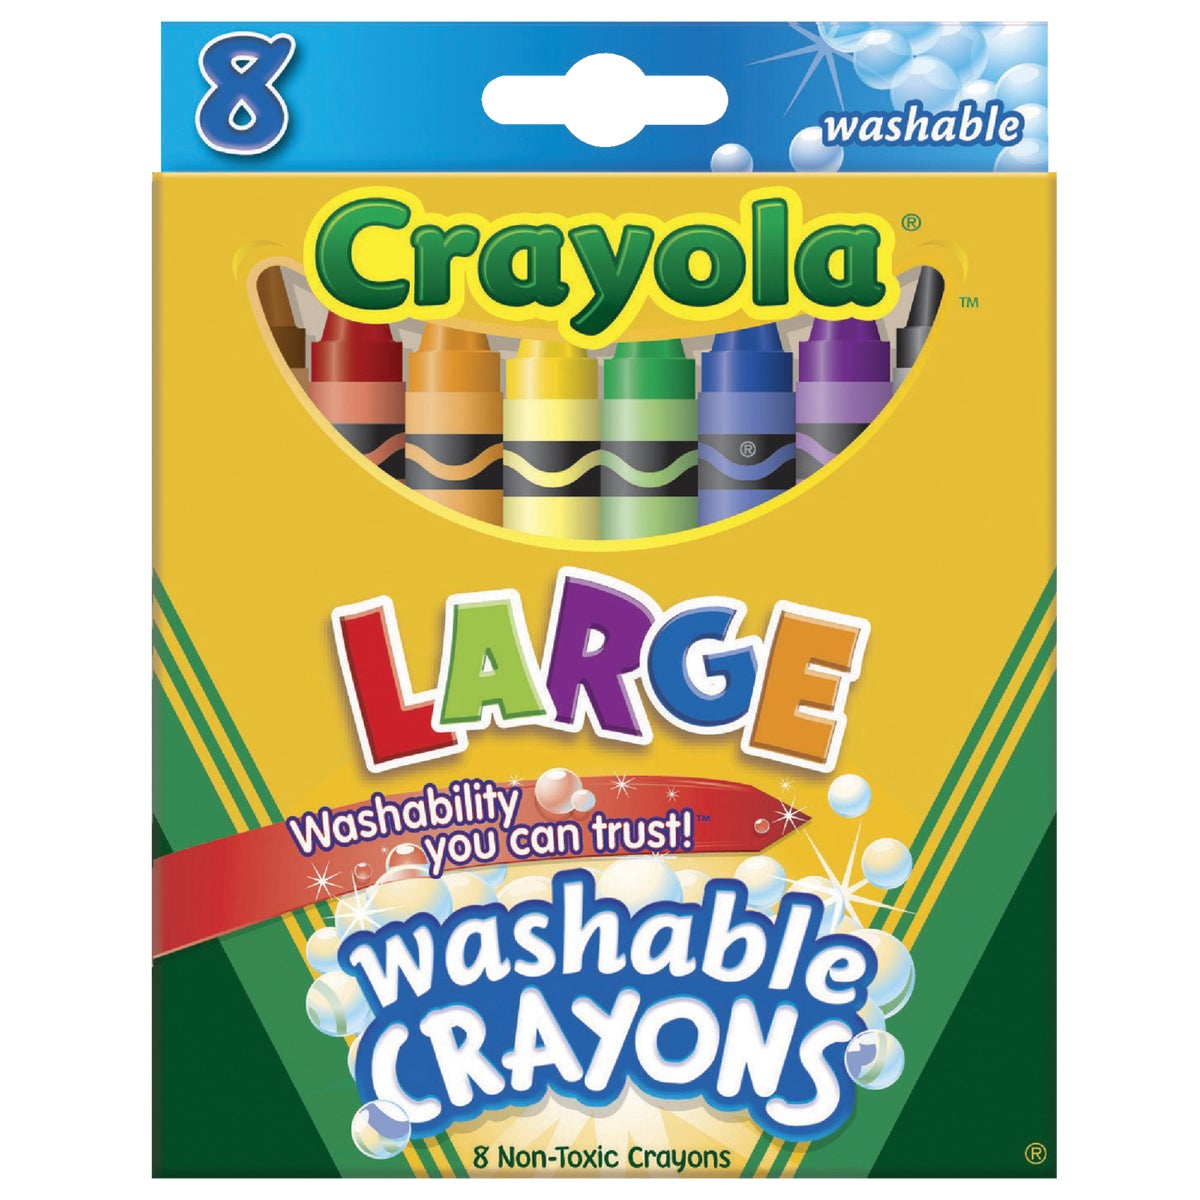 Item 971189, 8-count large washable Kid's First crayons.